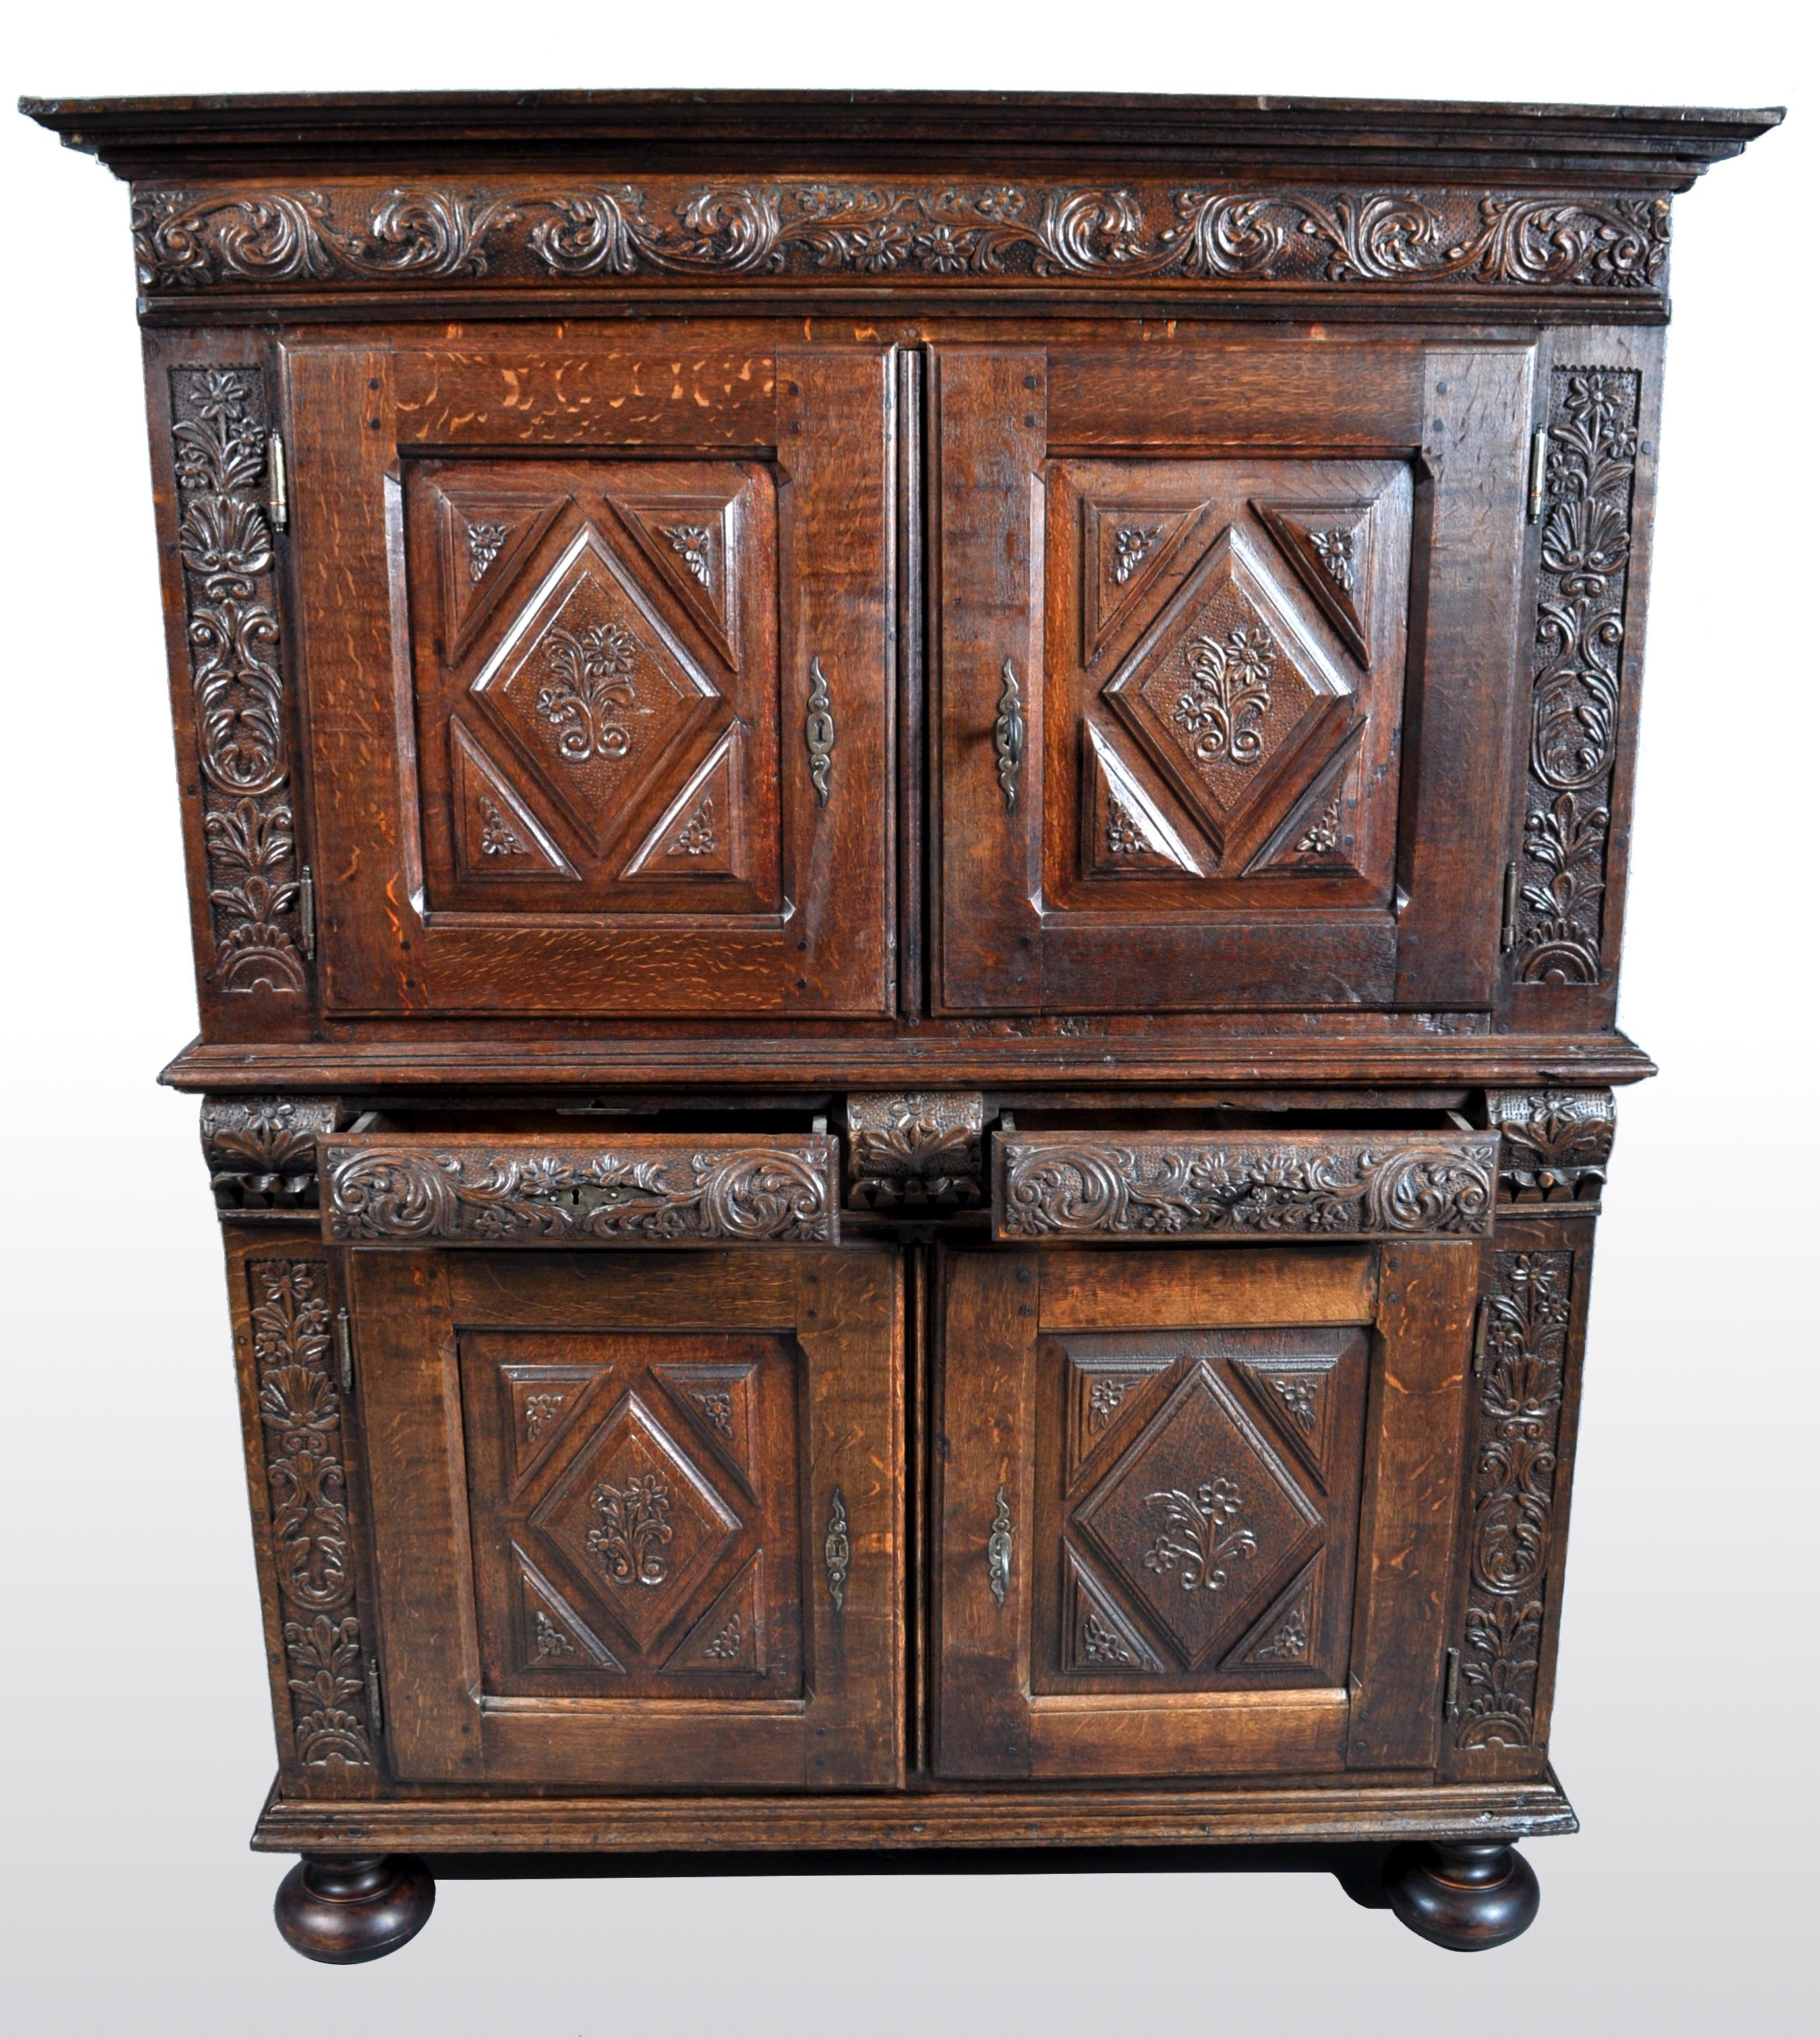 18th Century Antique French Baroque Carved Oak Court Cabinet, circa 1750